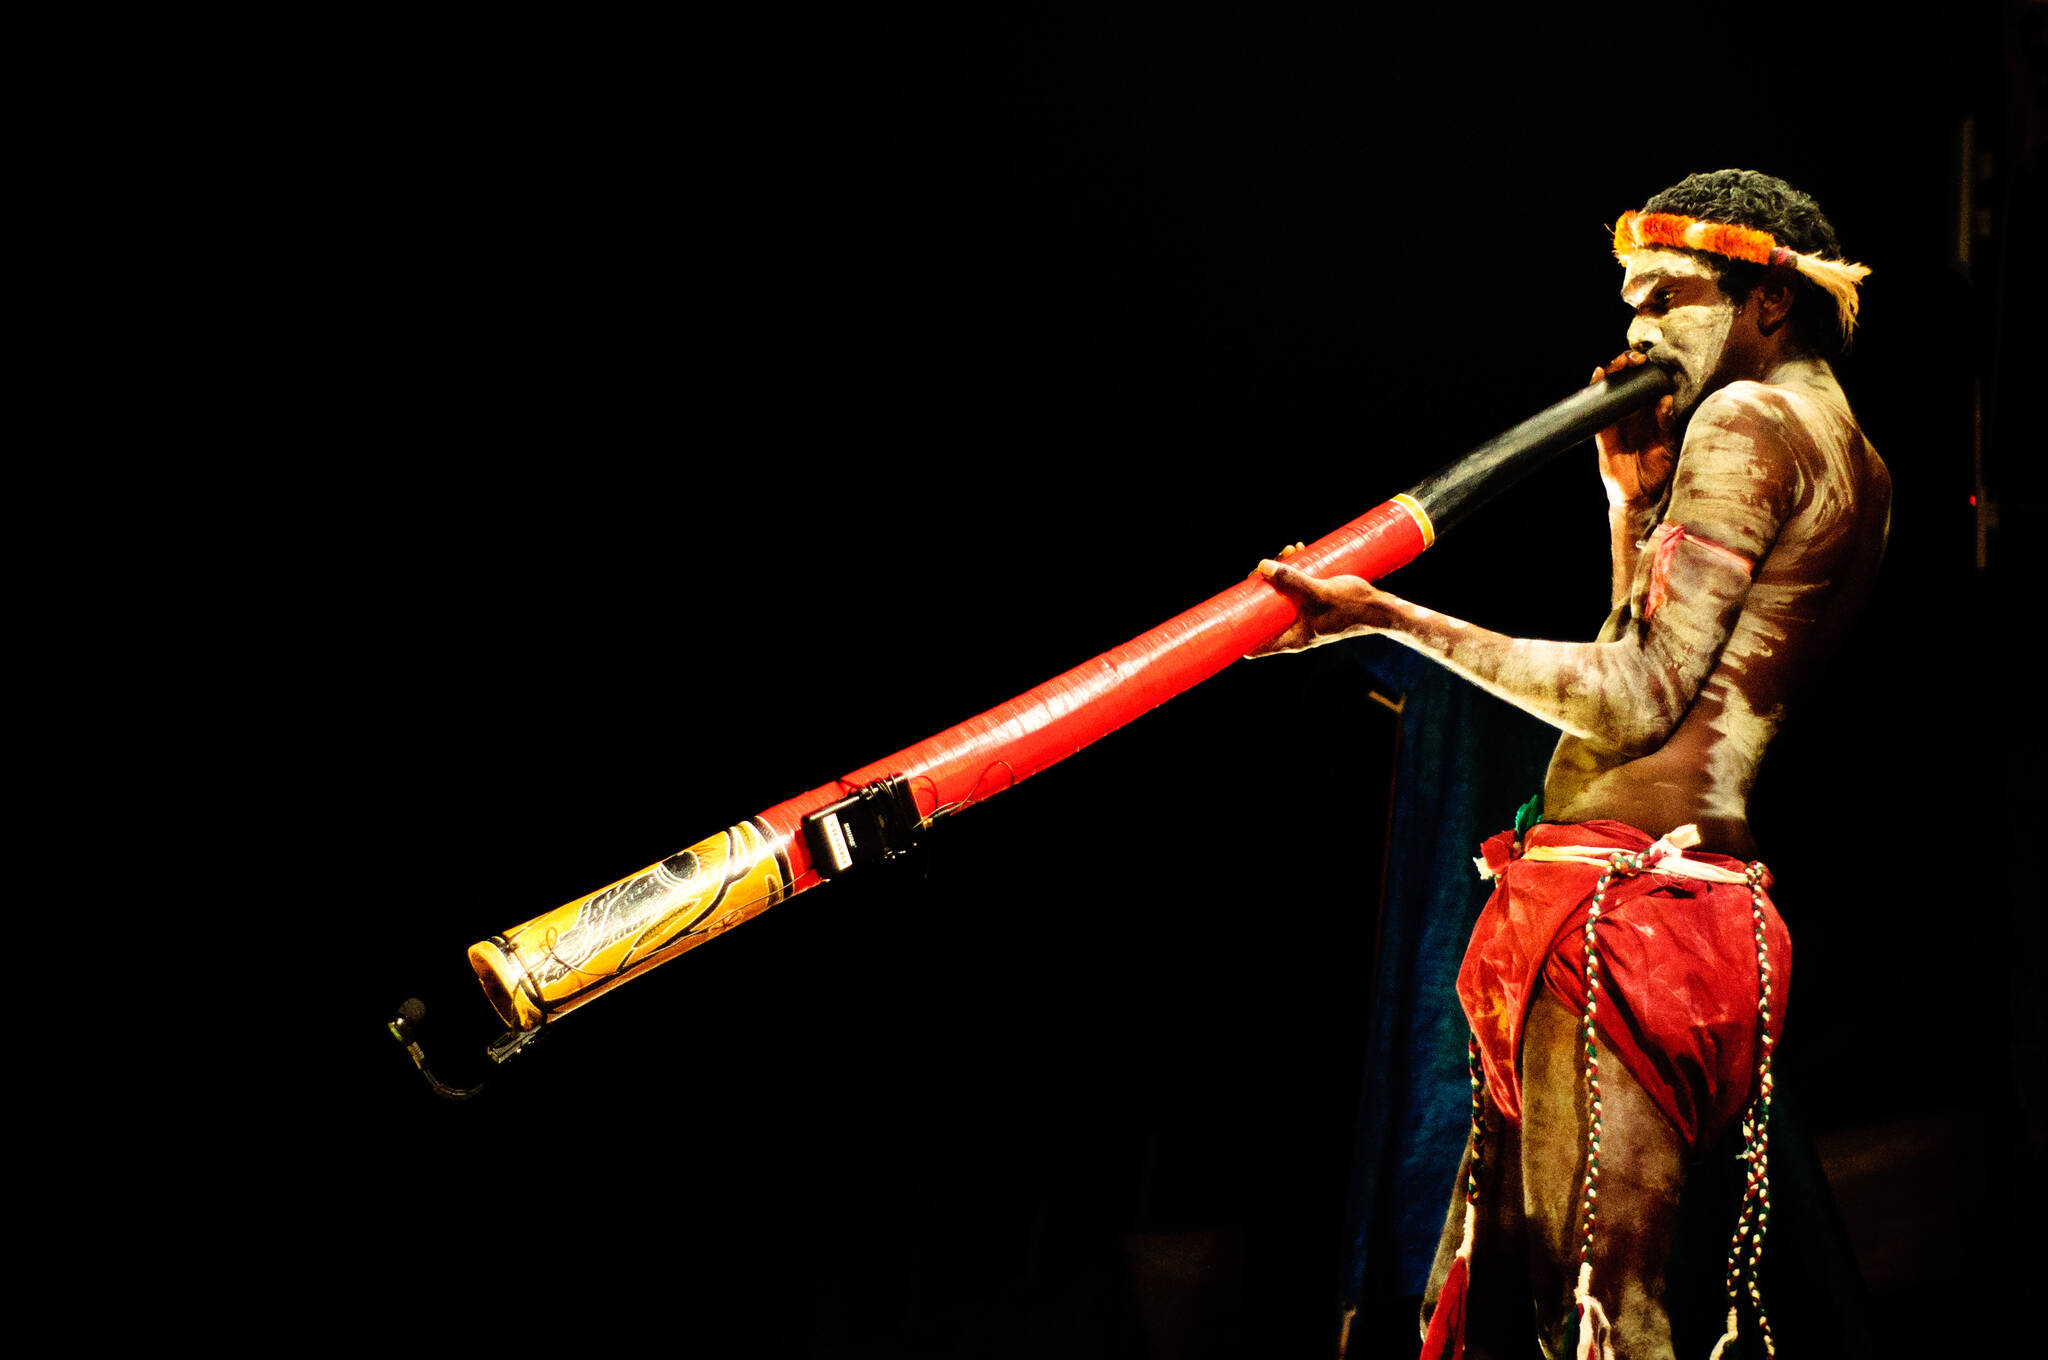 This November 2011 photo available under a Creative Commons license shows a man playing a didgeridoo, perhaps the best-known instrument requiring circular breathing. This instrument is a hollow tube, cylindrical or tapered, traditionally made from selected trees hollowed out by termites. Sounds are made when a player places the tube against the face and blows, vibrating the lips. (<a href="http://imagicity.com/" target="_blank">Imagicity</a>)